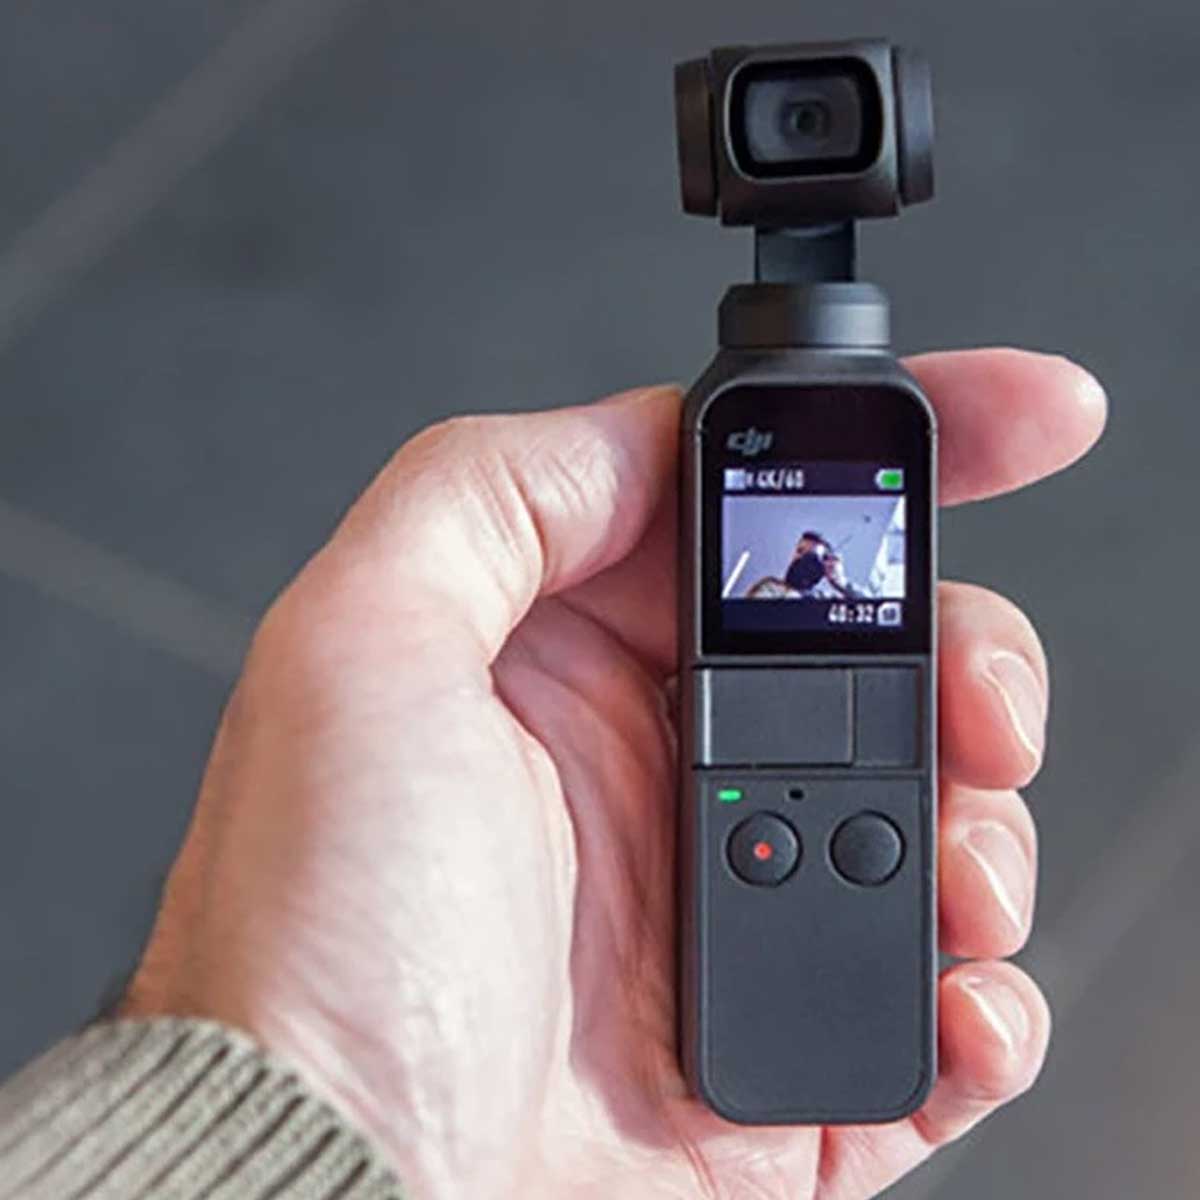 DJI Osmo Pocket Handheld 3 Axis Gimbal Stabilizer with integrated